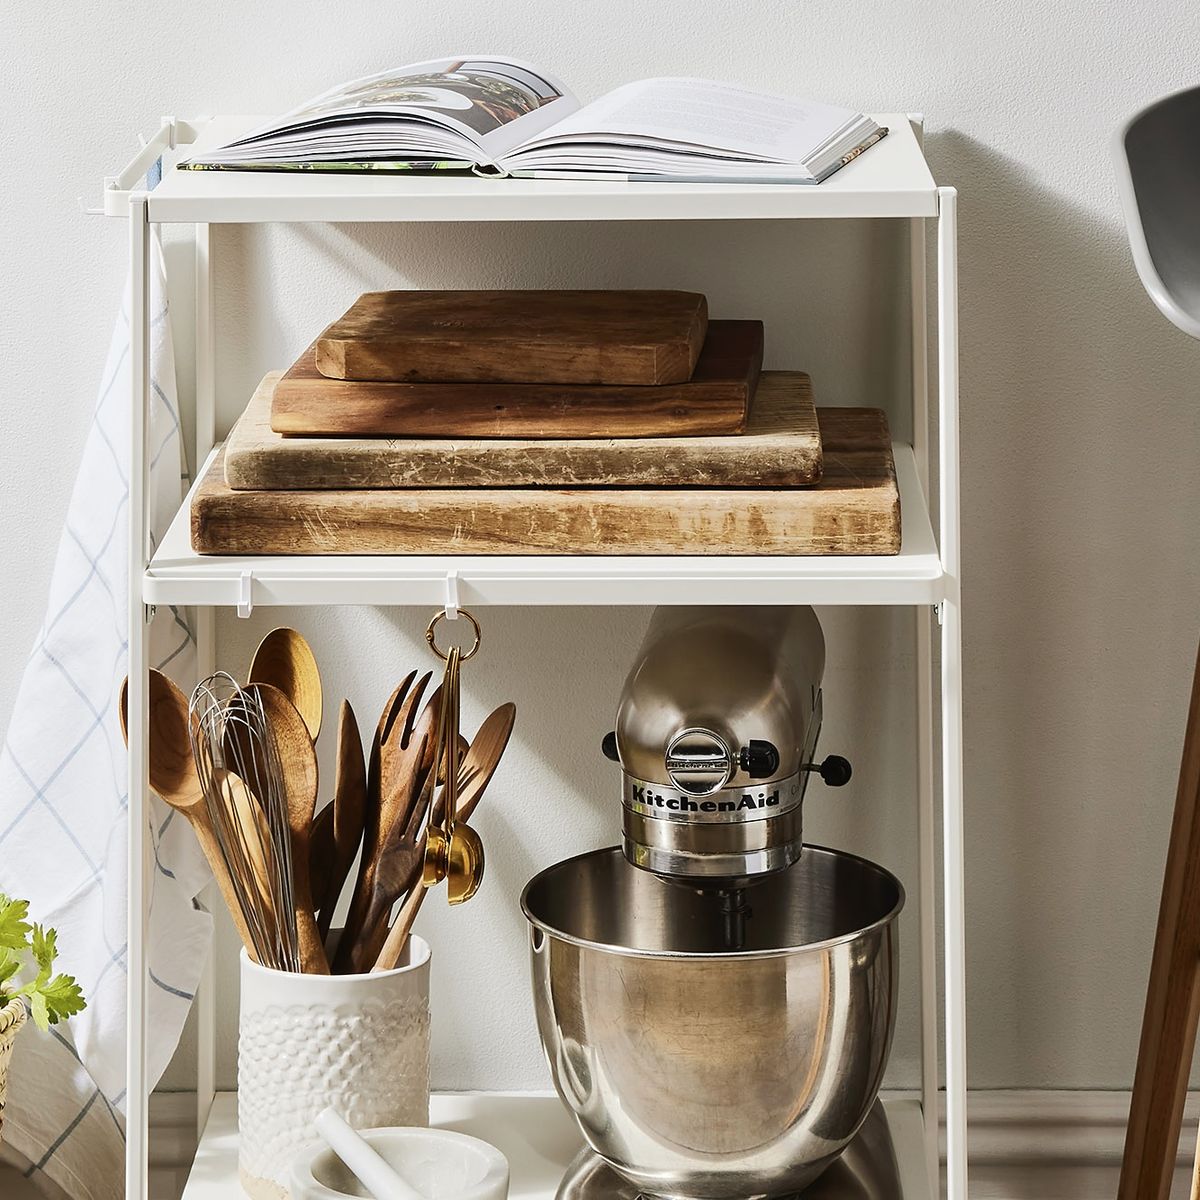 17 Smart Kitchen Storage Ideas You'll Want to Try ASAP